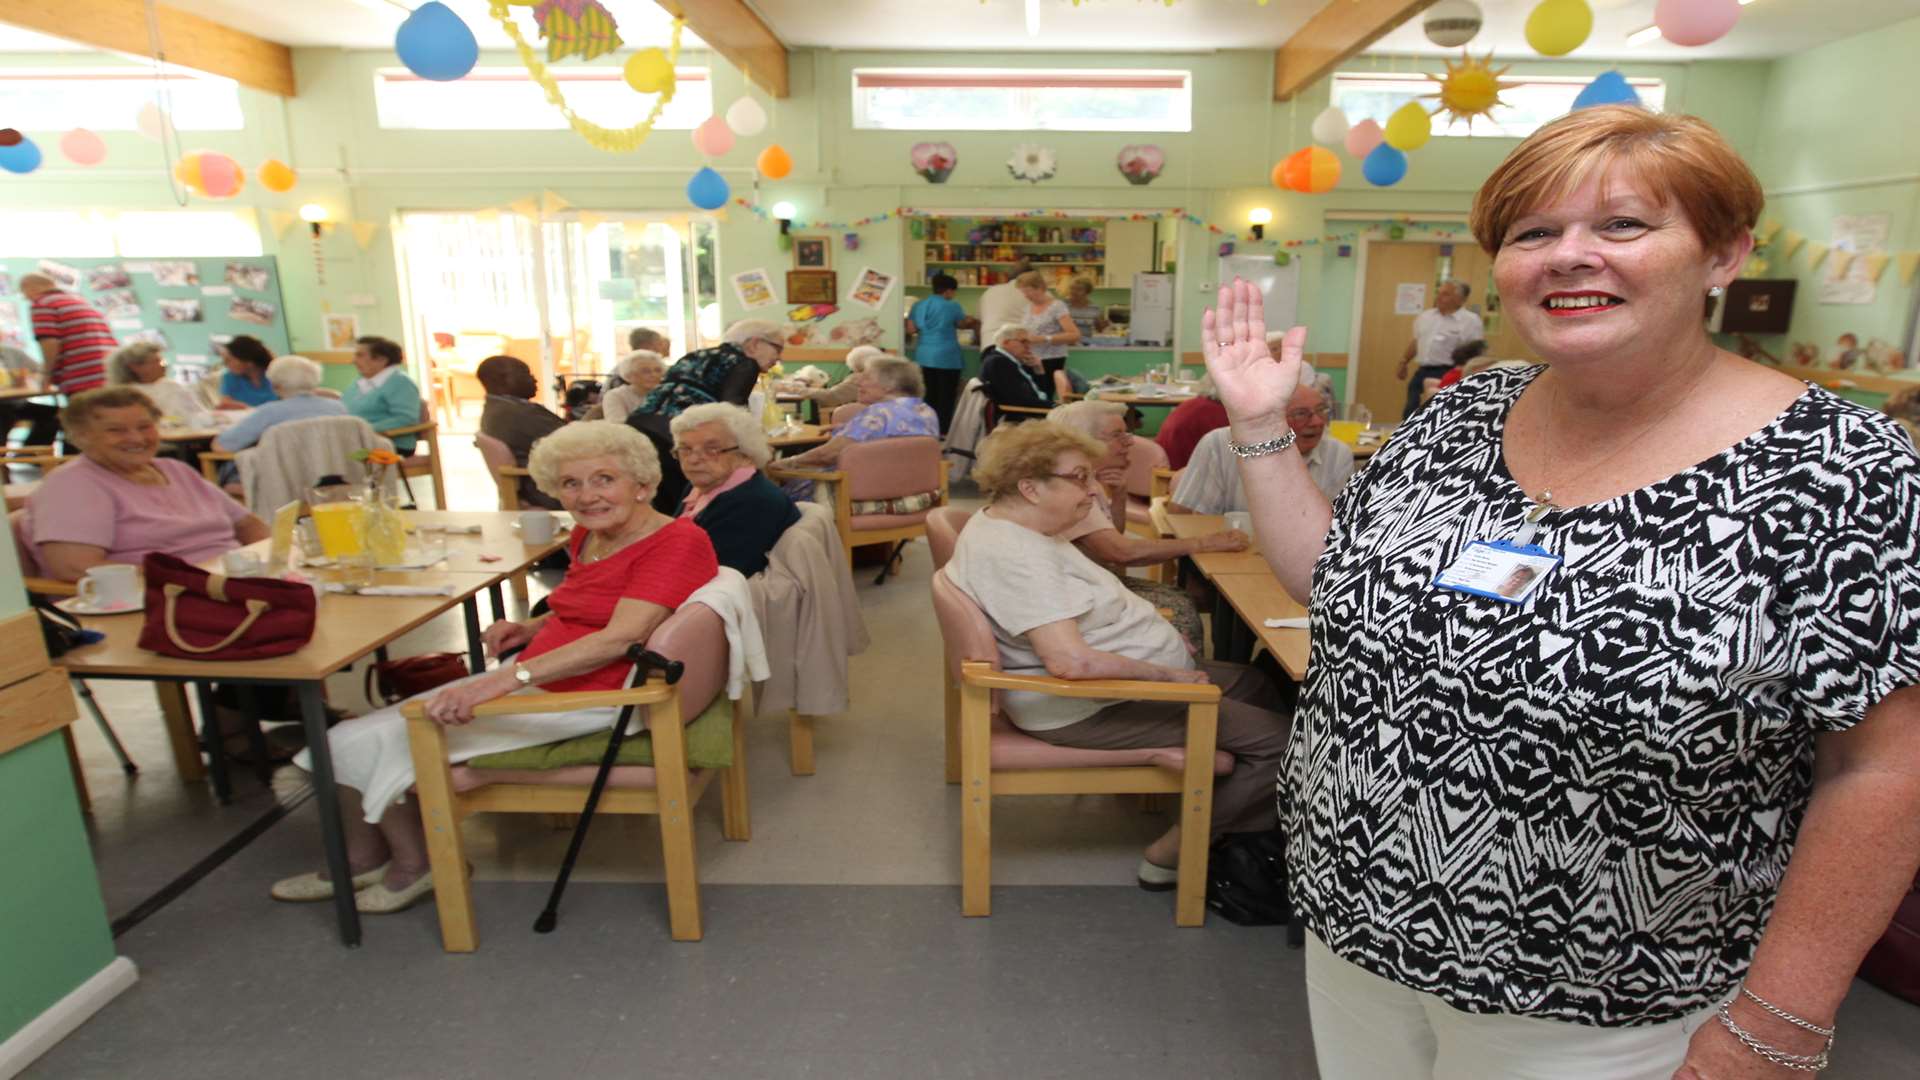 Chriss Monks, Day Services Manager, highlights the new day centre at Age UK